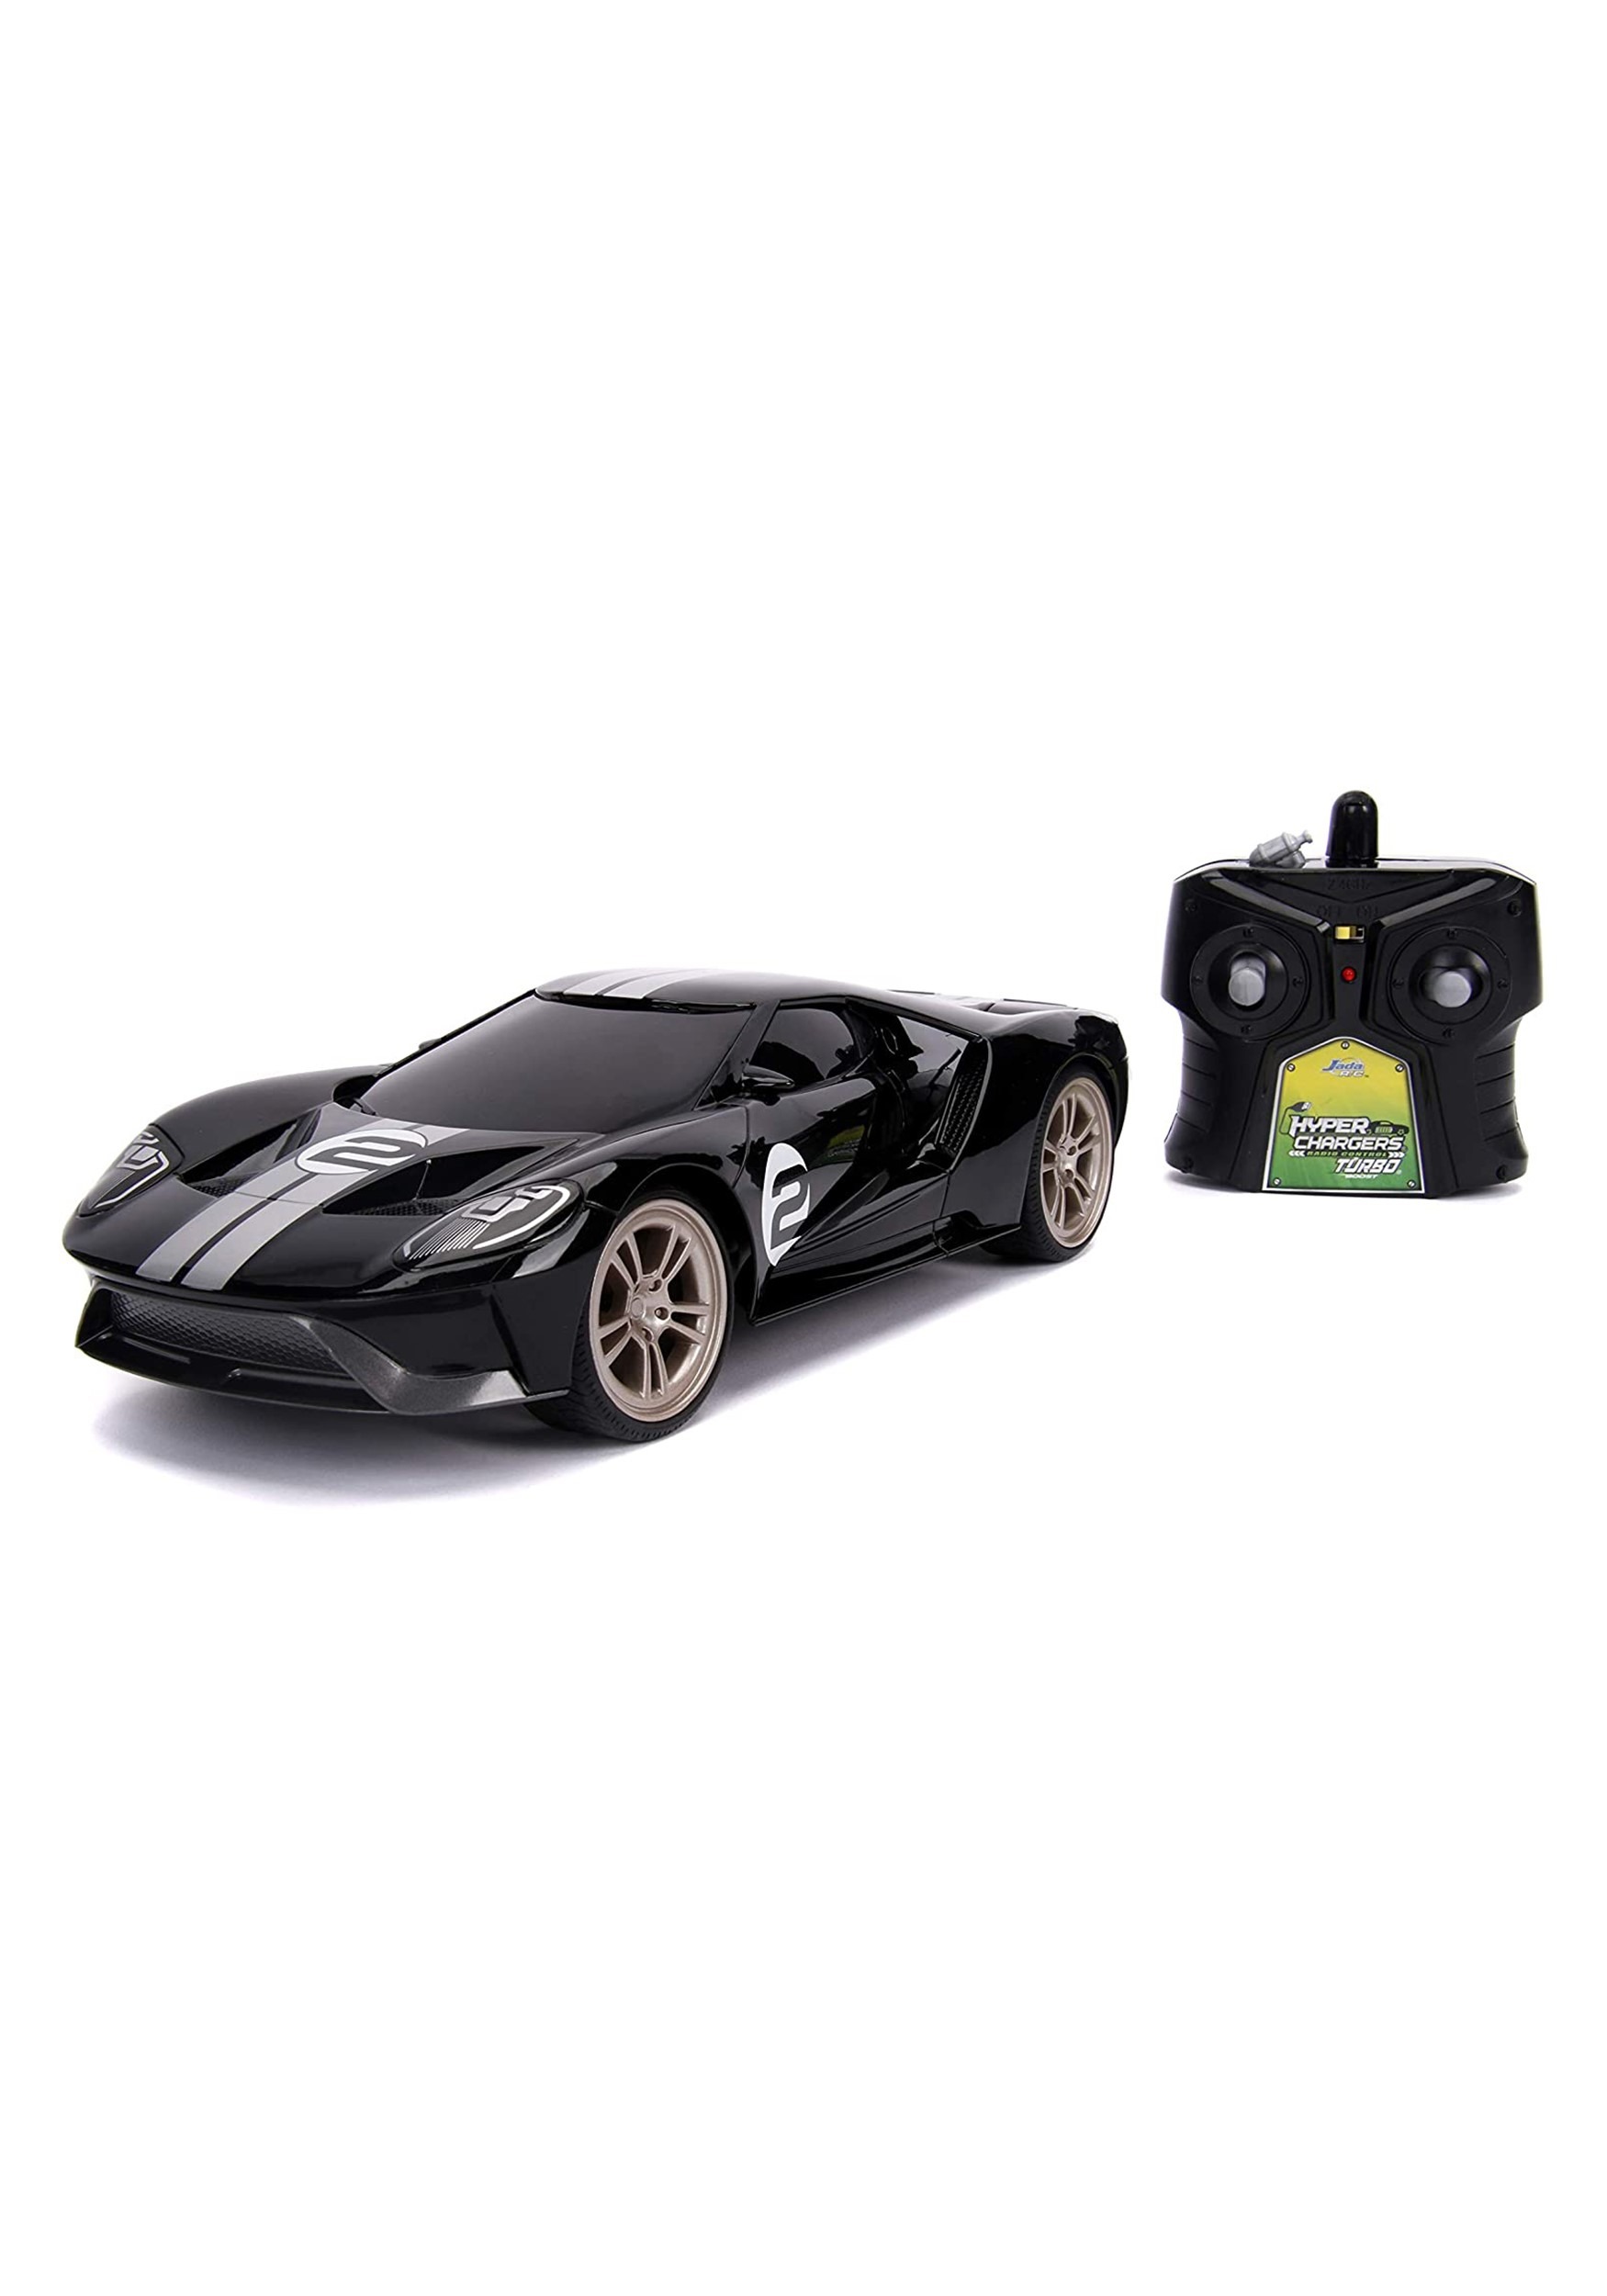 2017 FordGT 1:16 R/C Toy Car | Toy Car Gifts for Kids